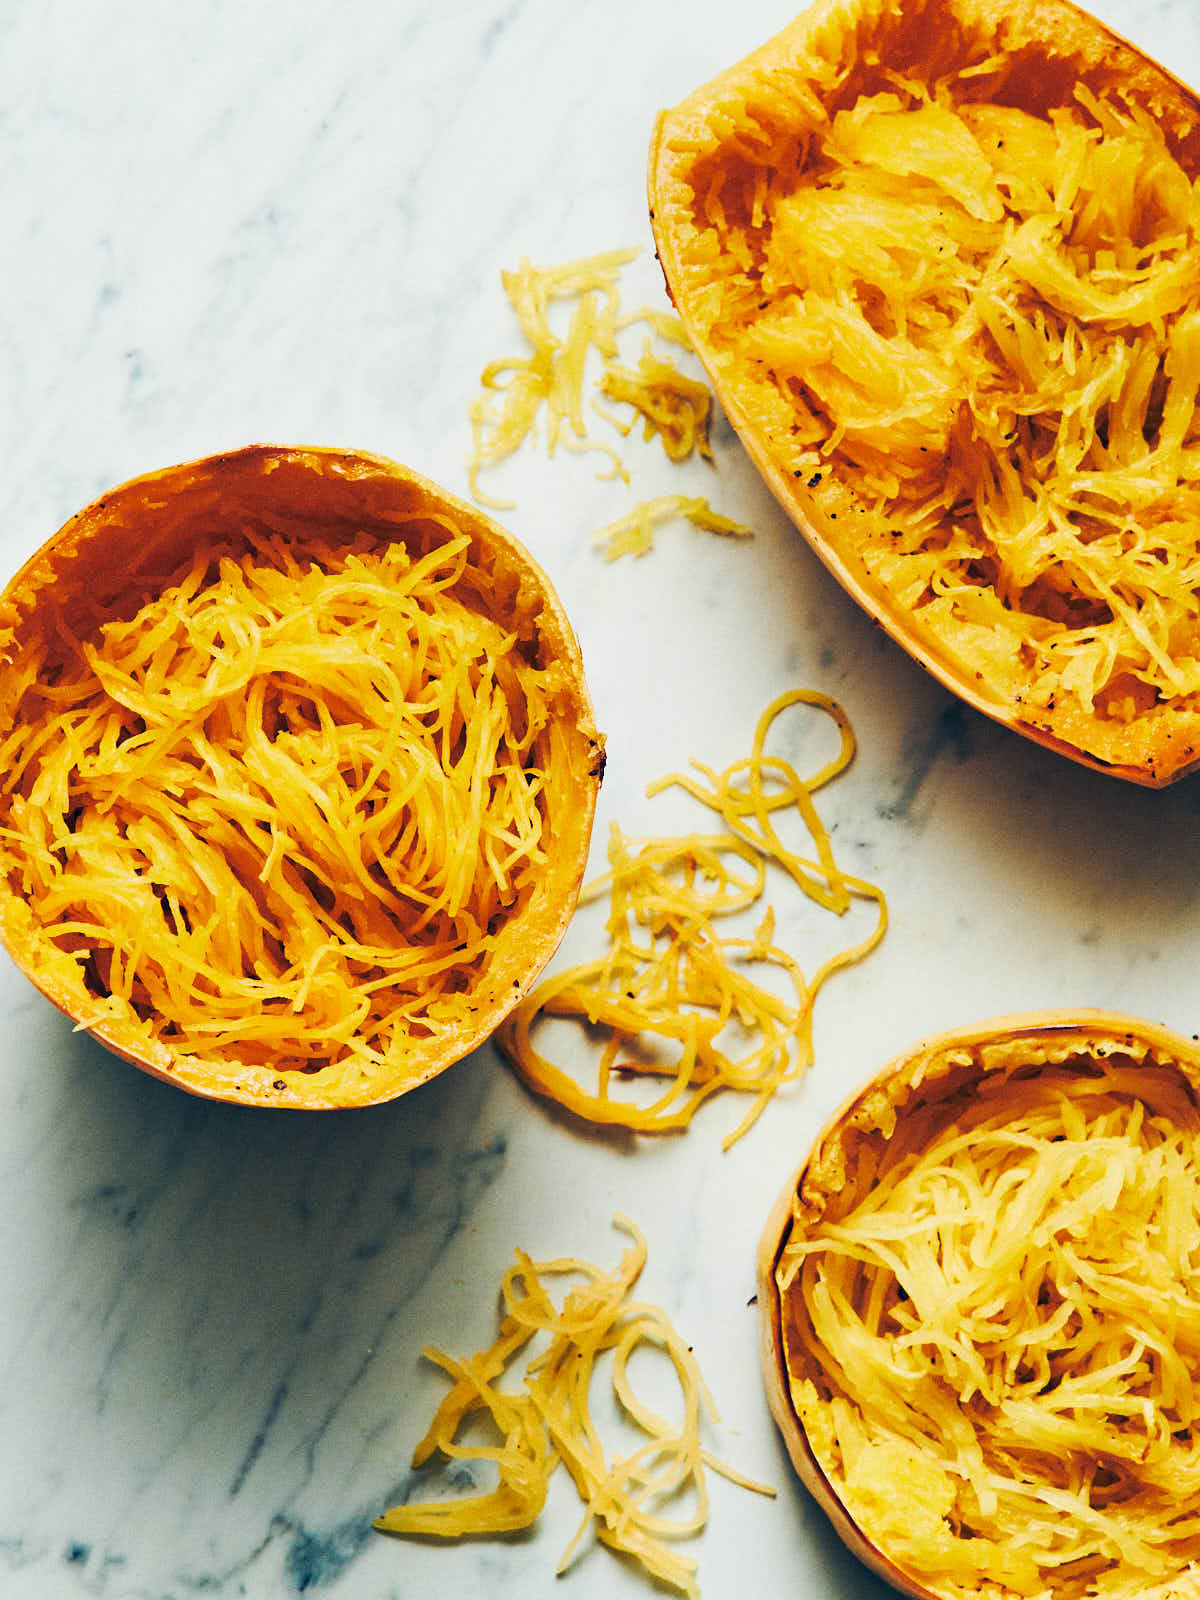 Spaghetti squash cooked three ways with noodles scooped out sitting on a marble surface